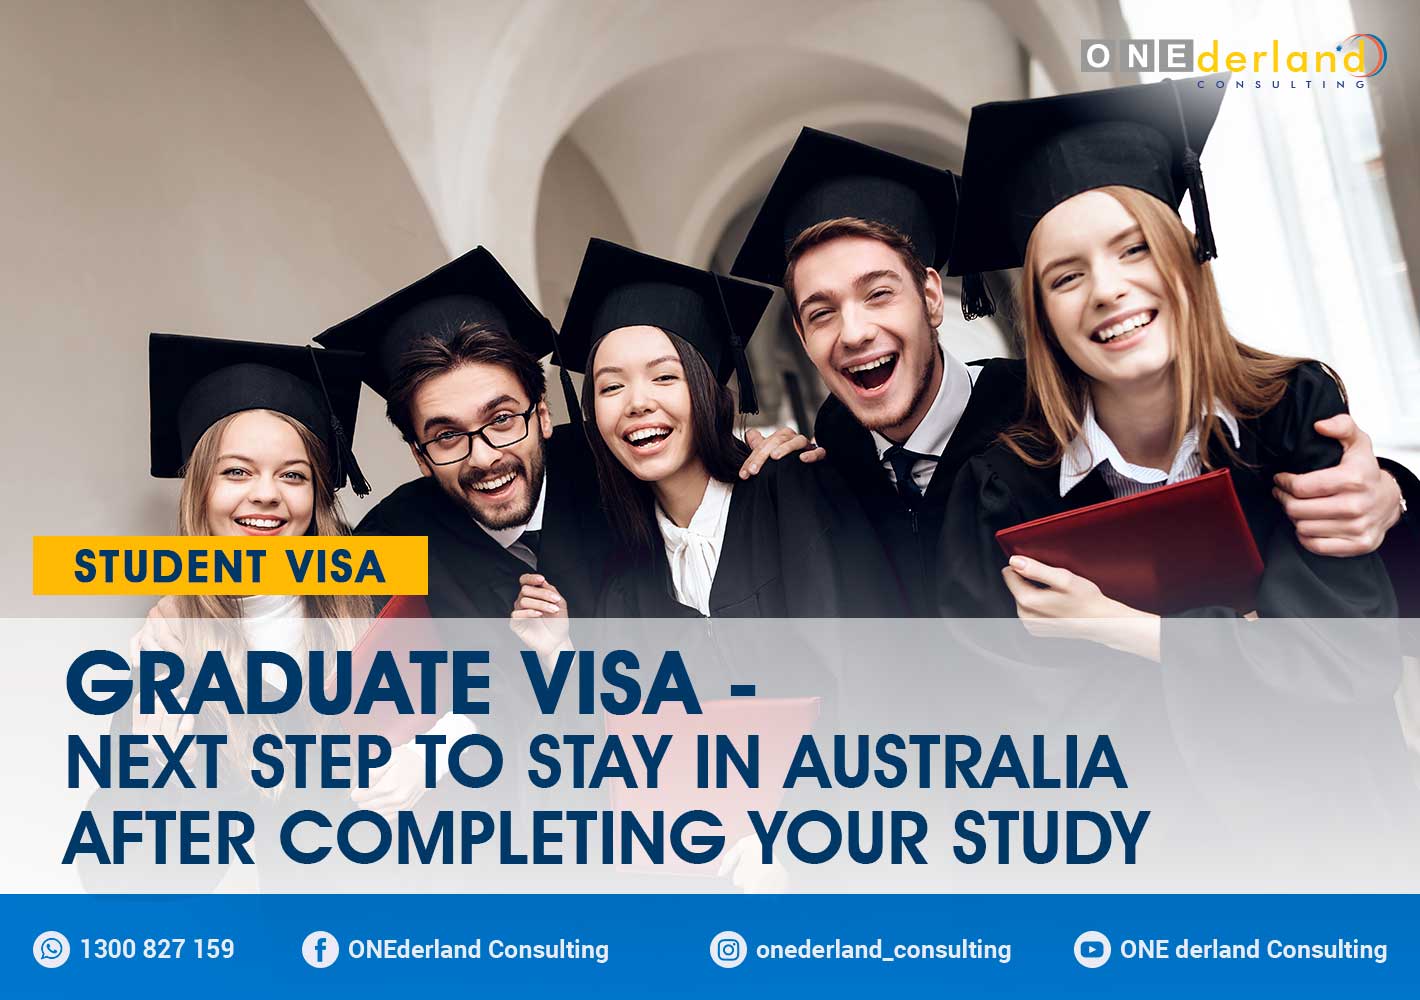 Graduate Visa - Next Step To Stay in Australia After Completing Your Study